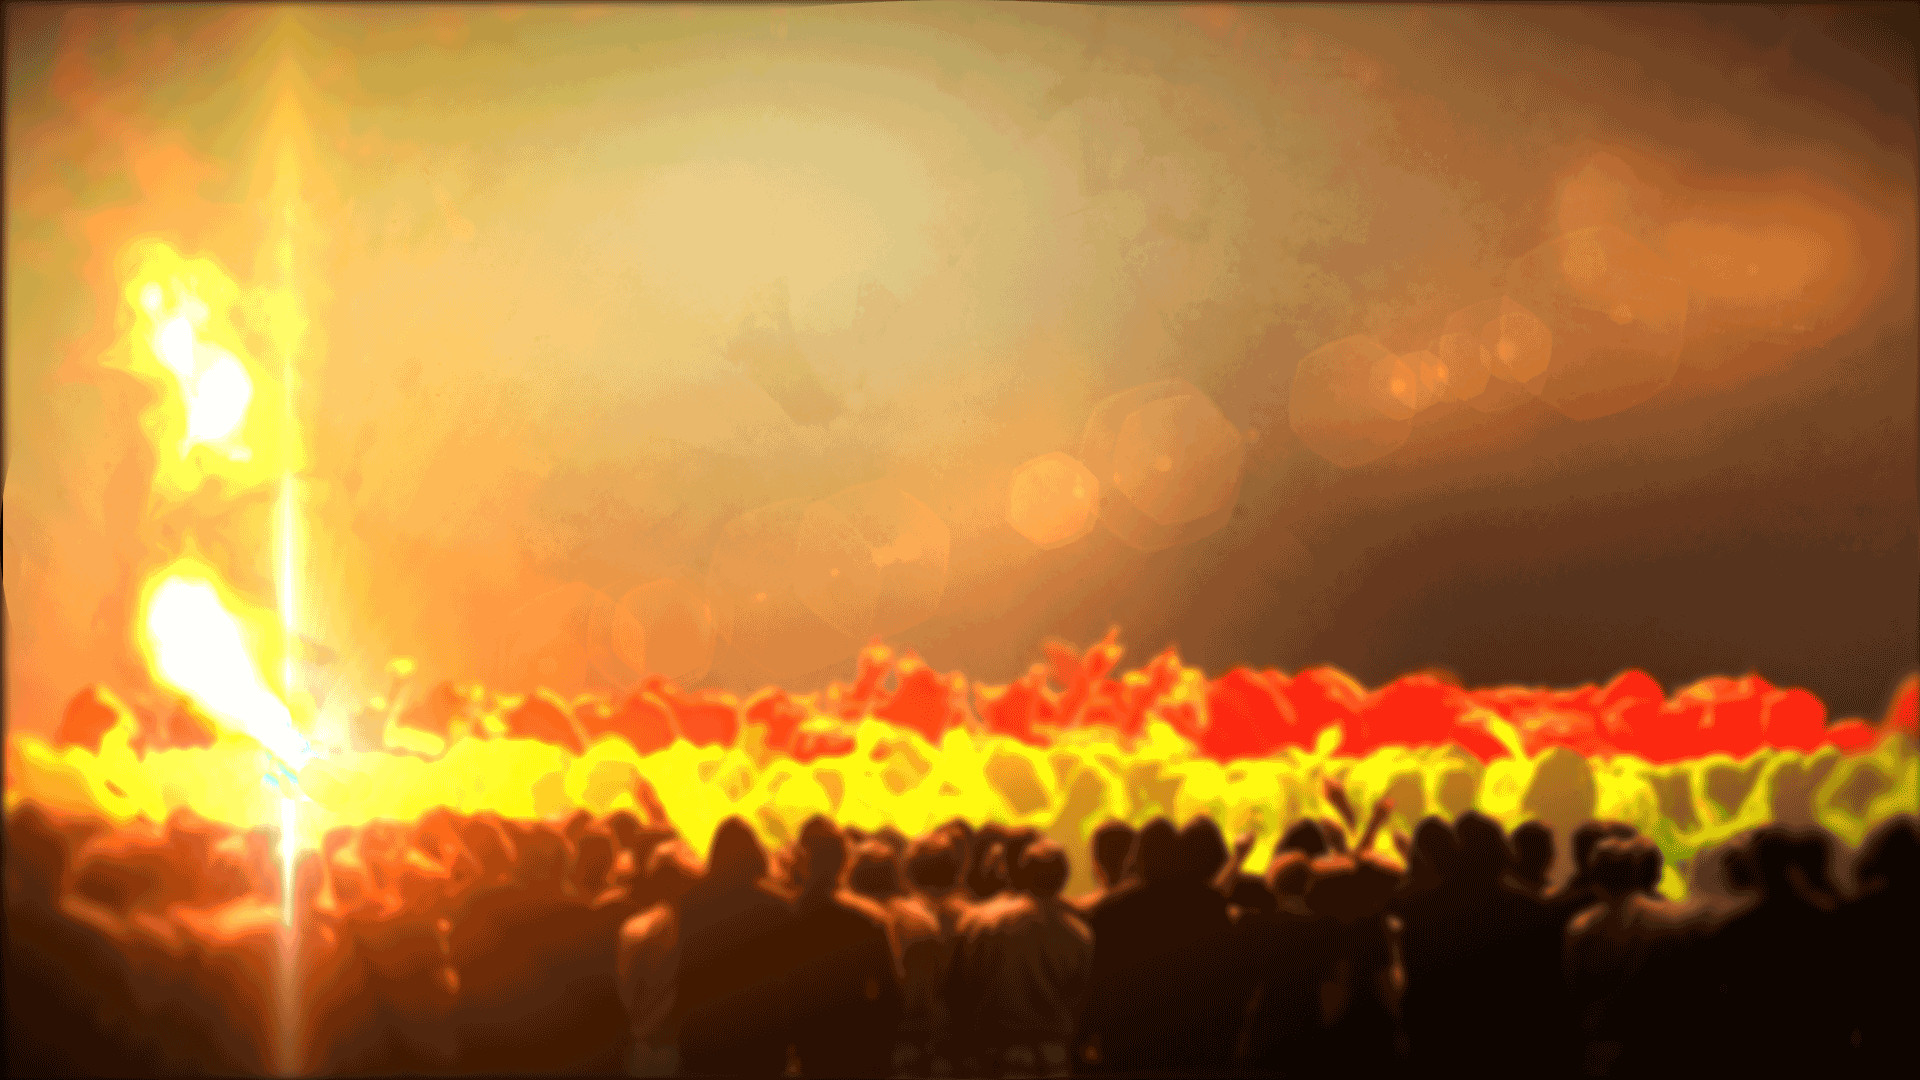 At Pentecost, The Glory Of God Descended On His Followers - Pentecost Holy  Spirit Background - 1920x1080 Wallpaper 